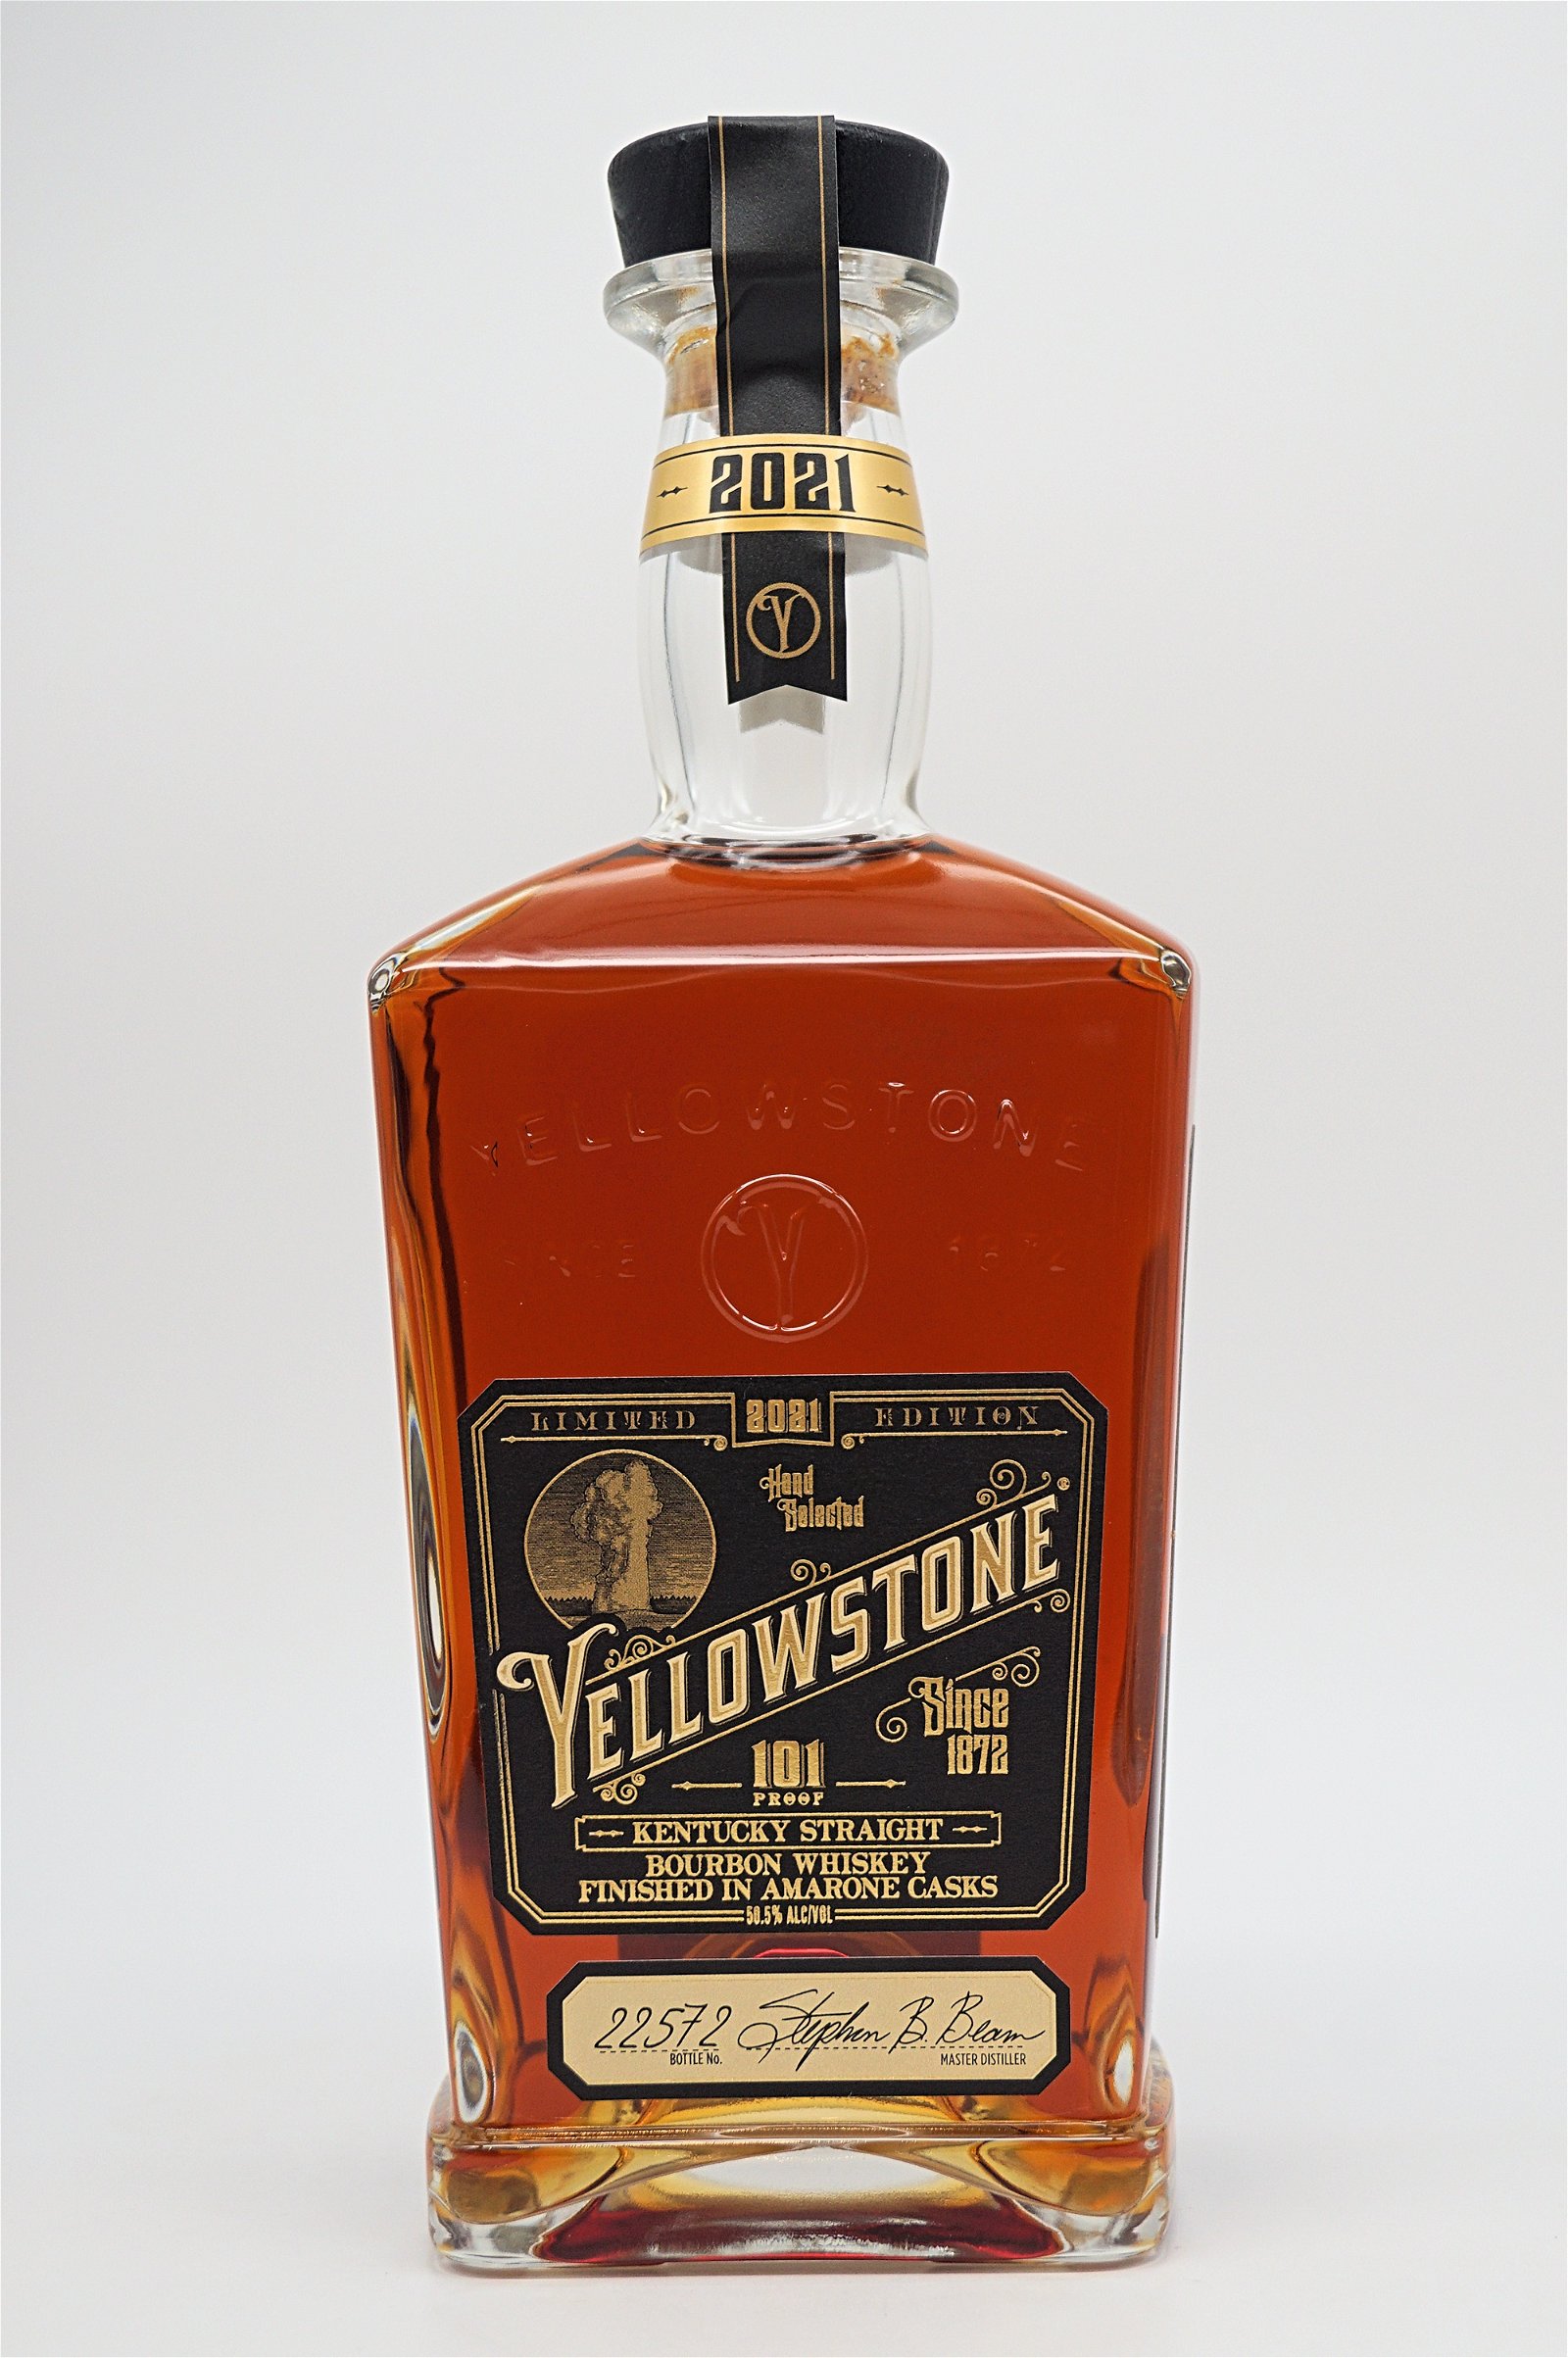 Yellowstone Bourbon Finished in Amarone Casks 2021 Limited Edition